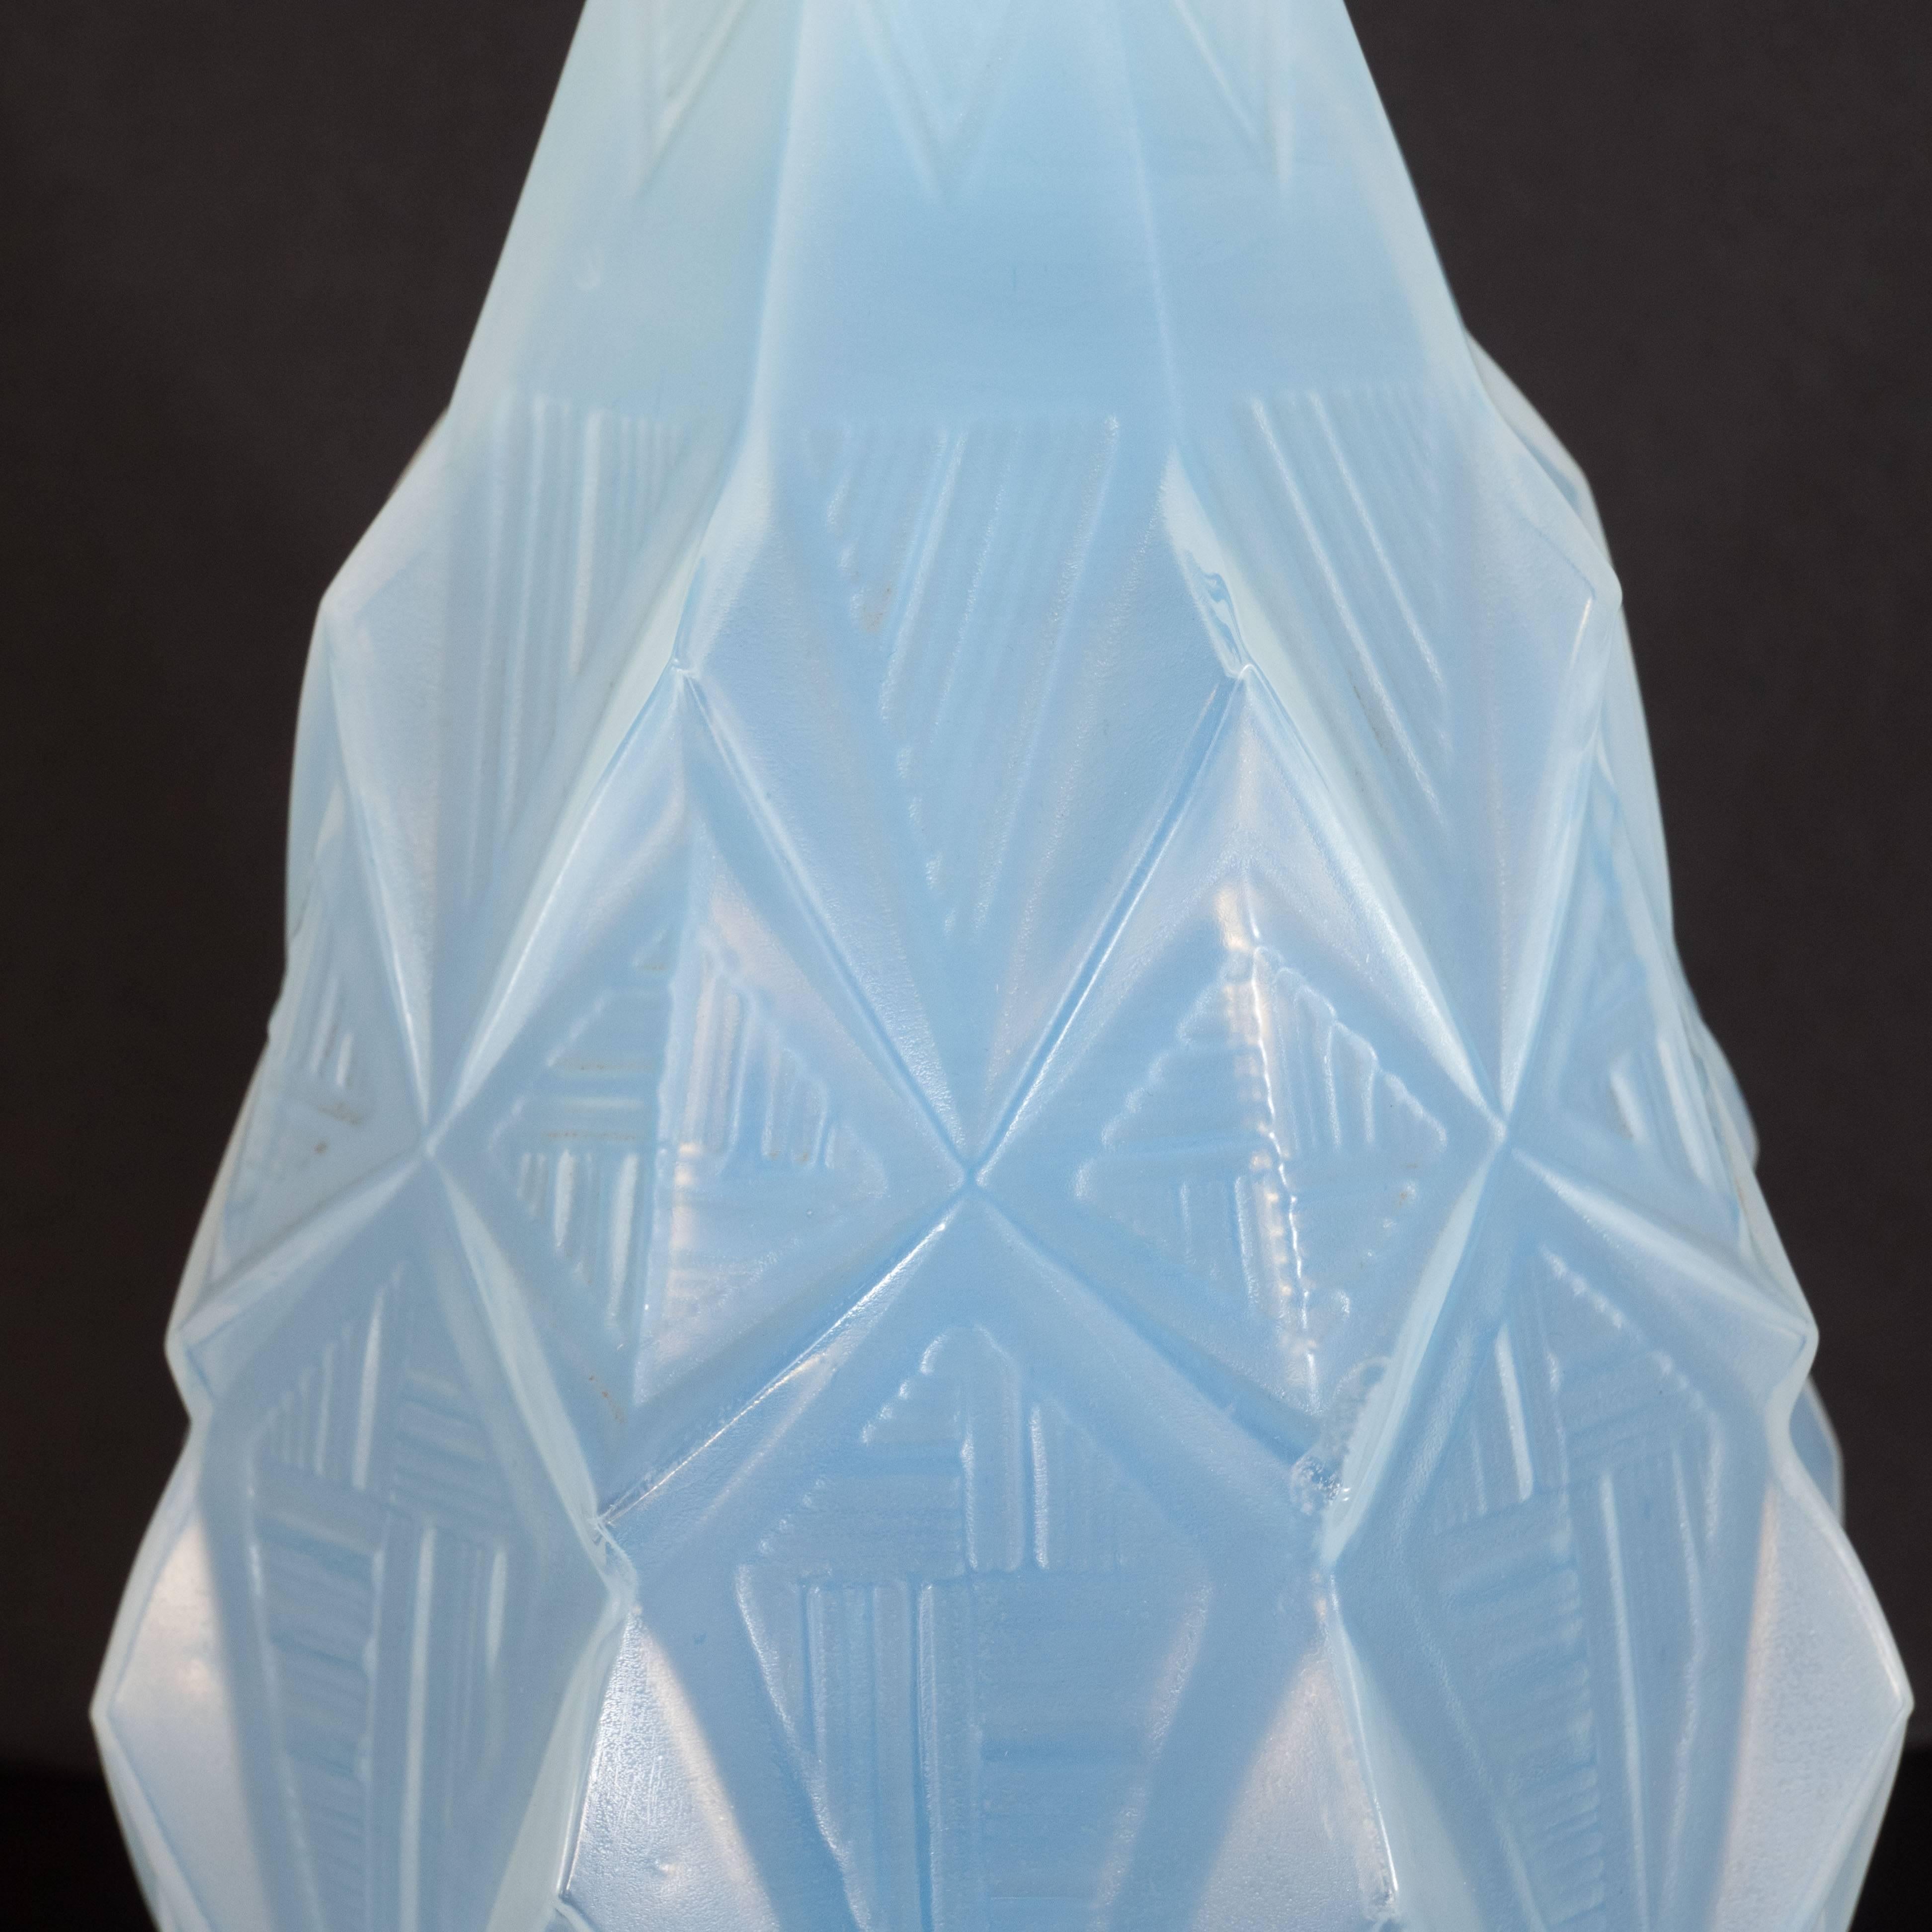 French Art Deco Opalescent Vase with Geometric Patterns in Relief Signed Sabino 1